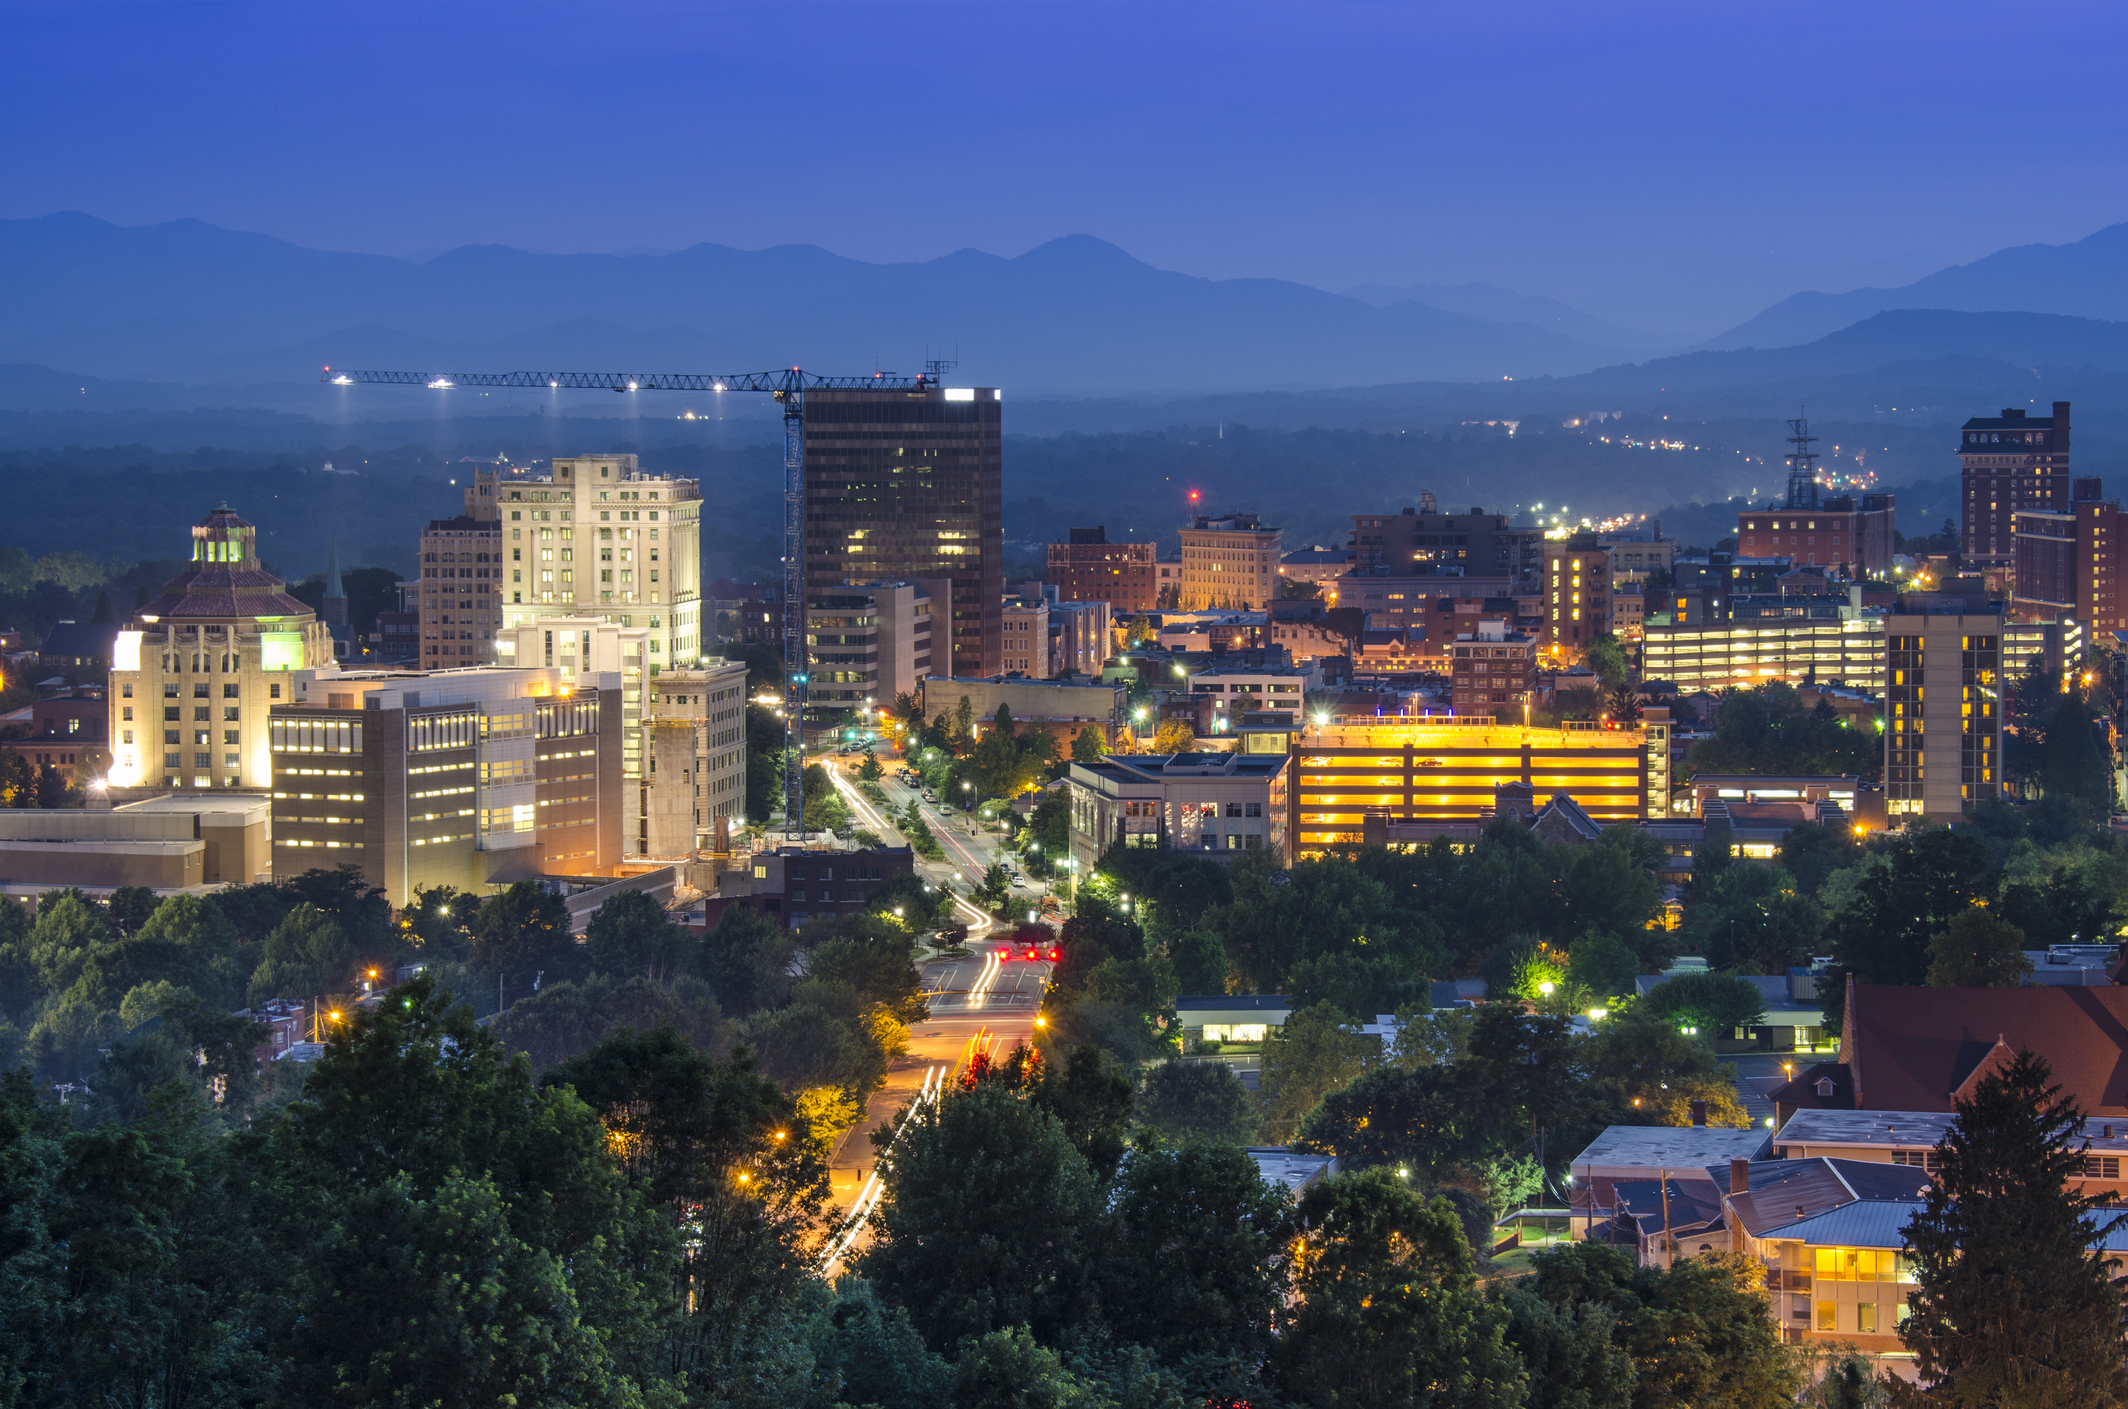 With only 89000 permanent residents Asheville has transformed over the last couple decades into one of the most vibrant cit